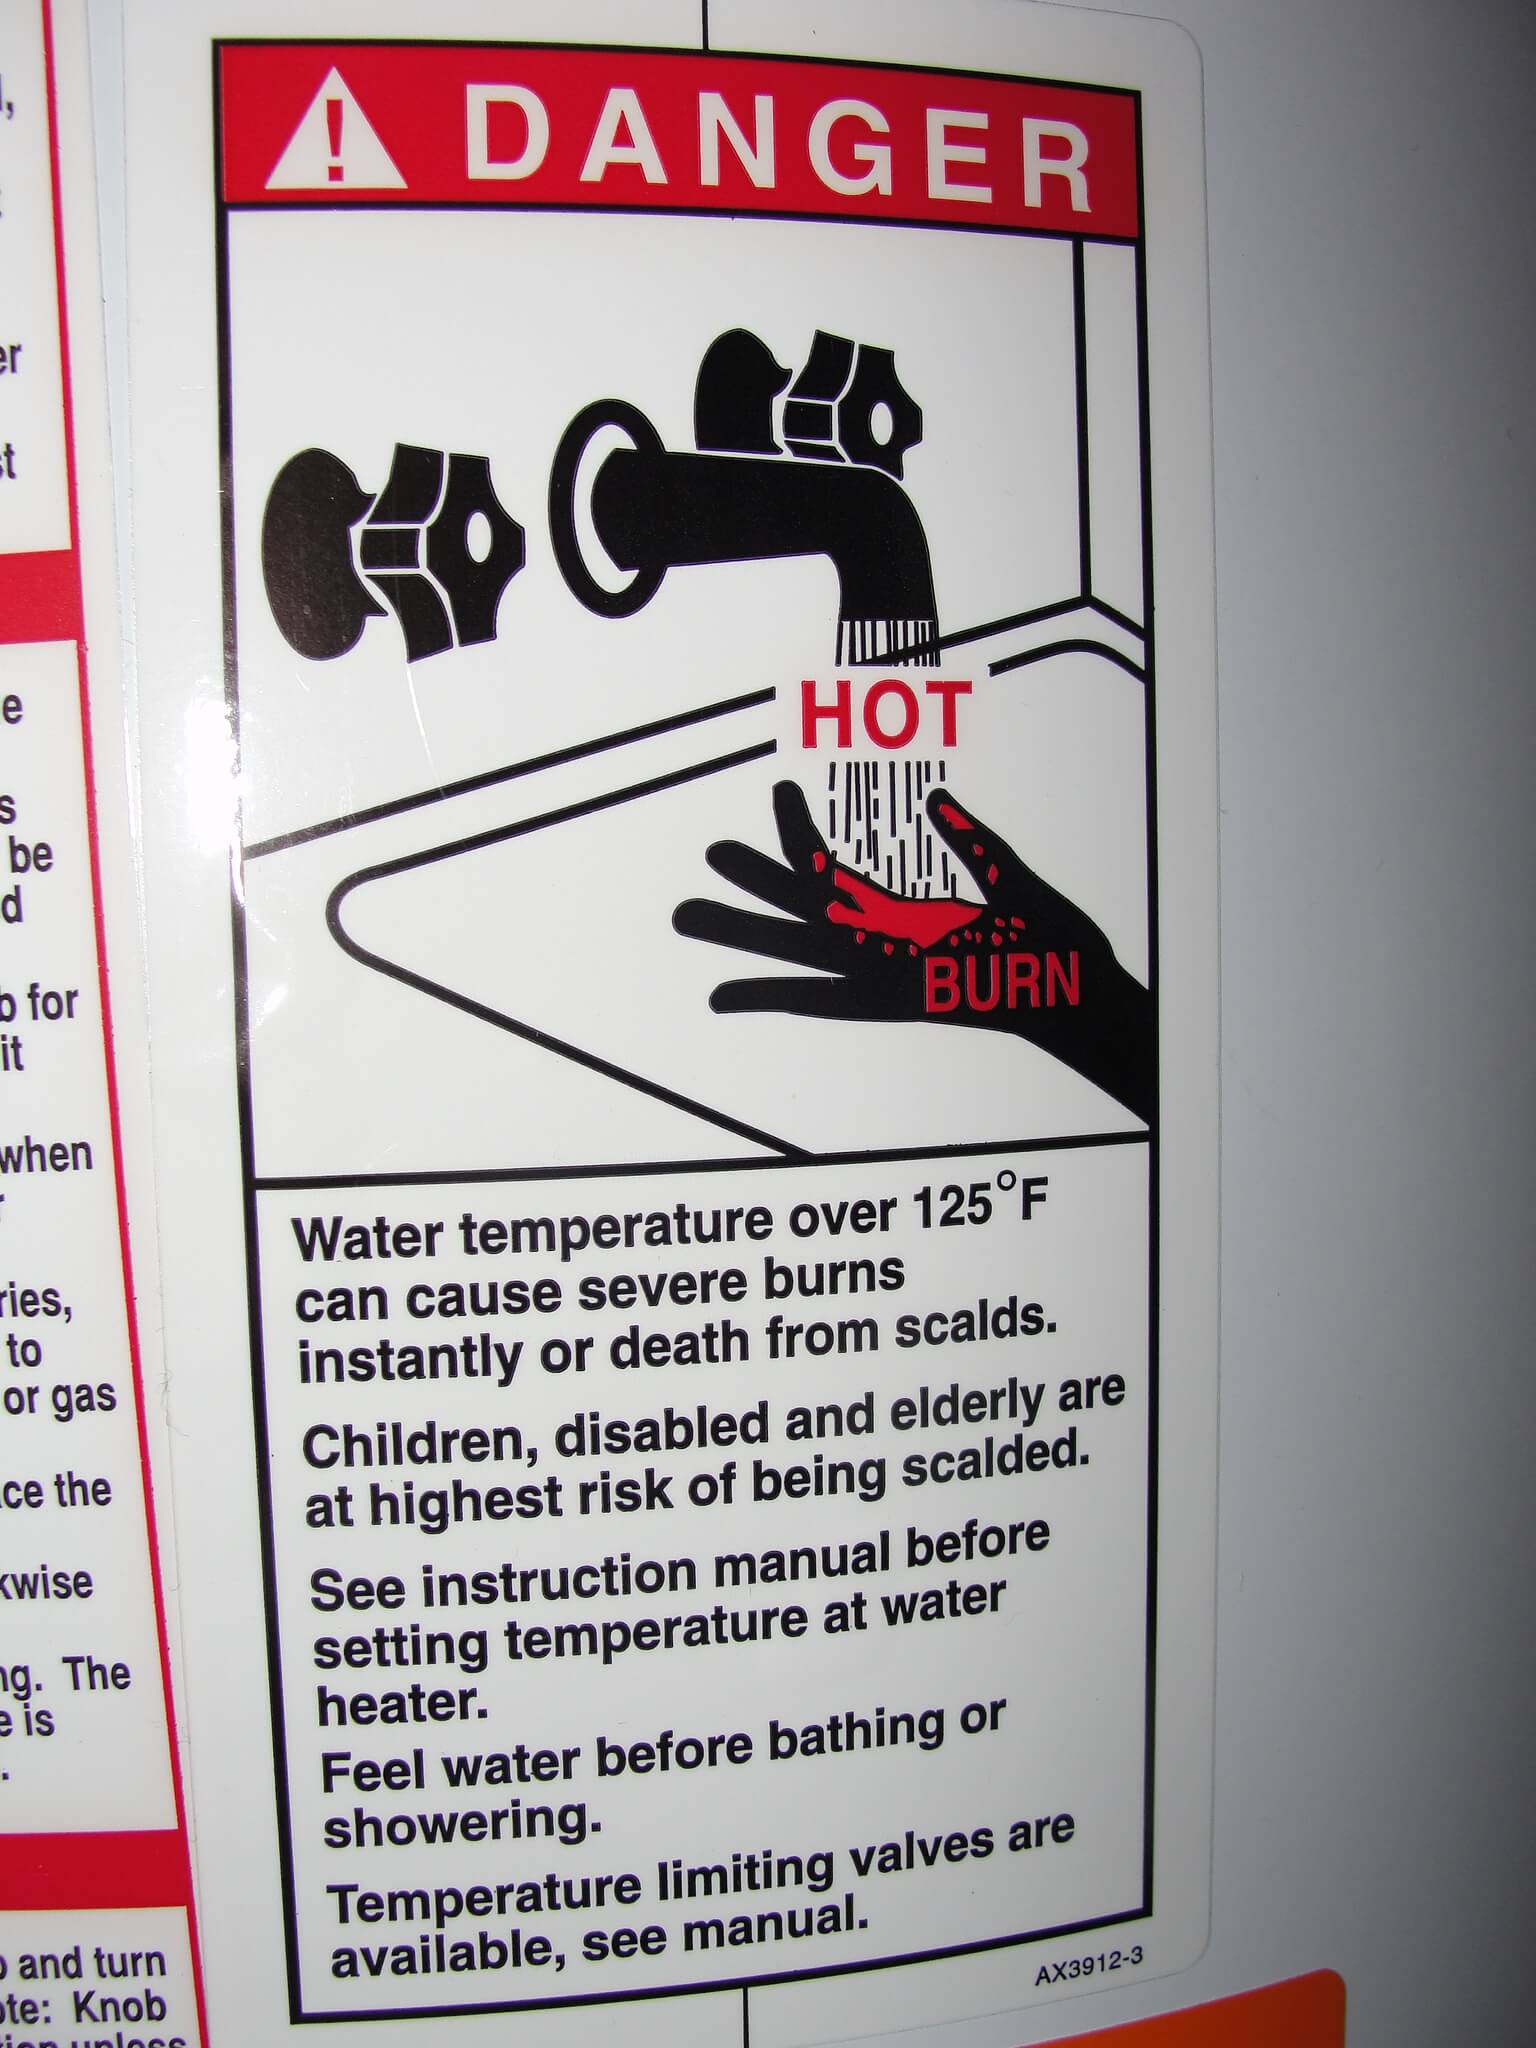 At what temperature does hot water cause second-degree burns?